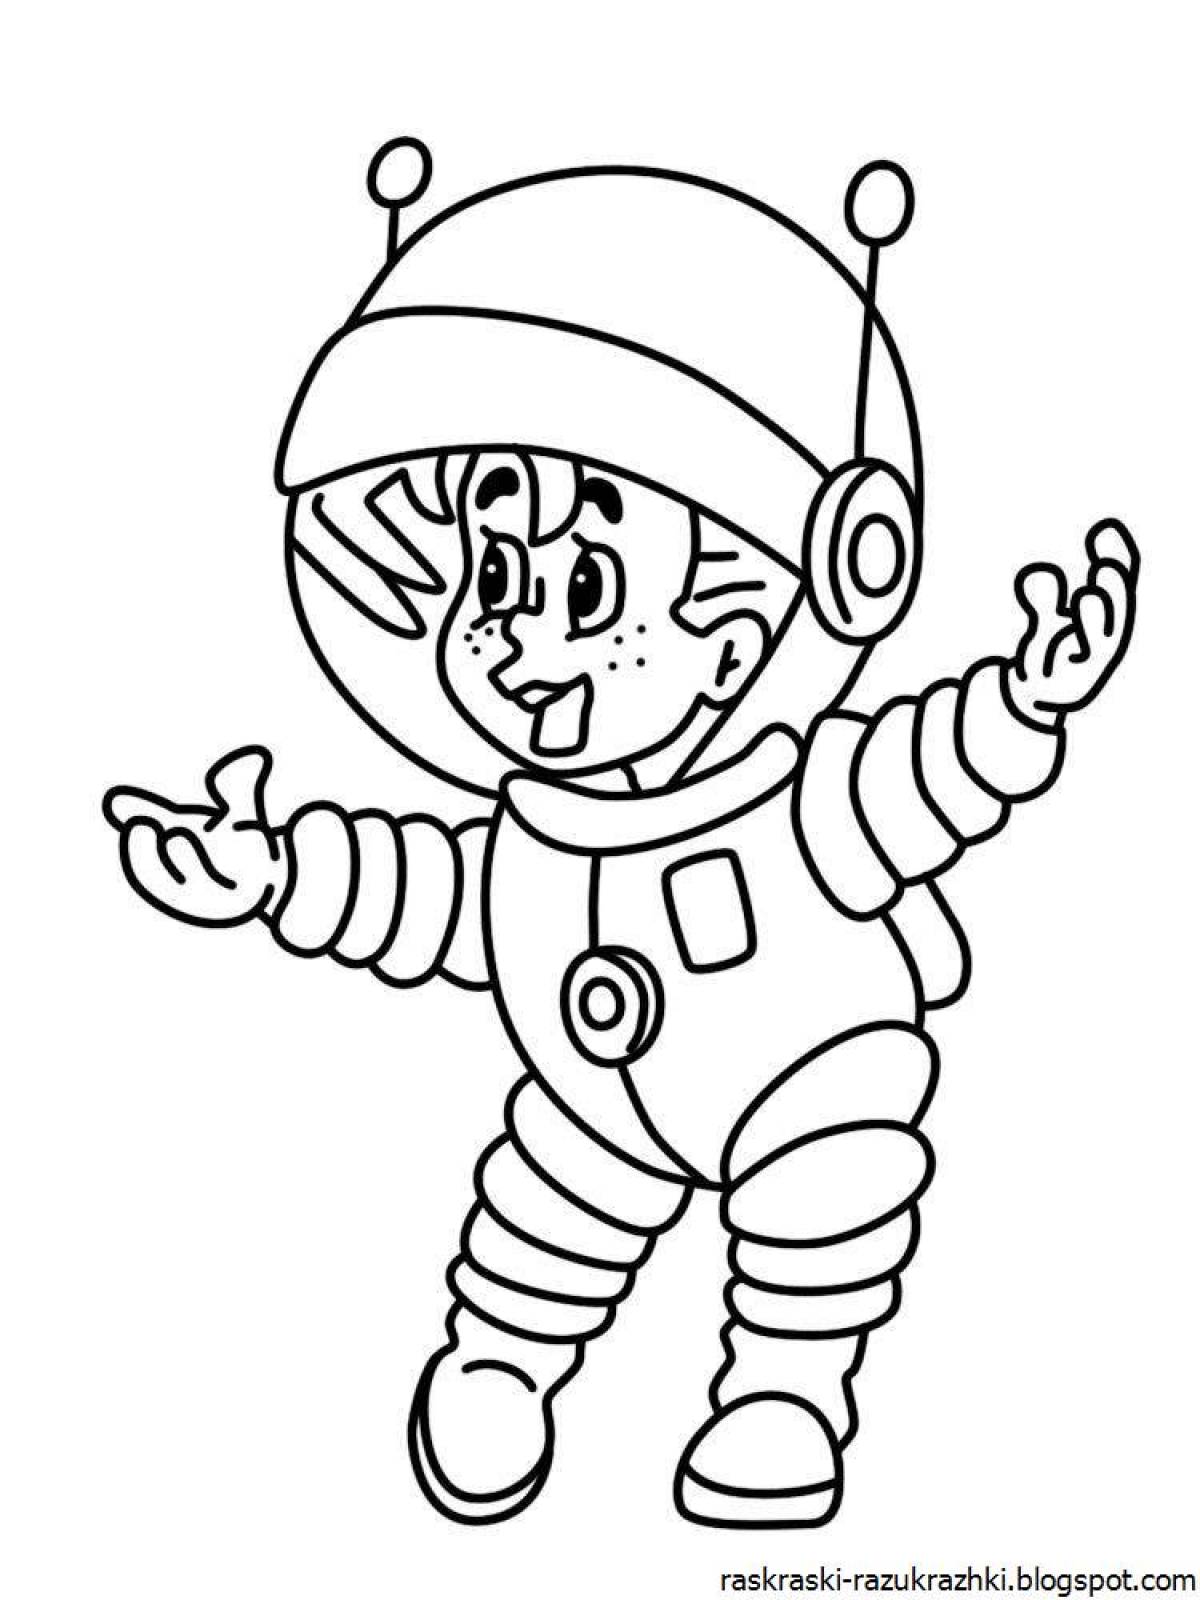 Coloring page gorgeous astronaut